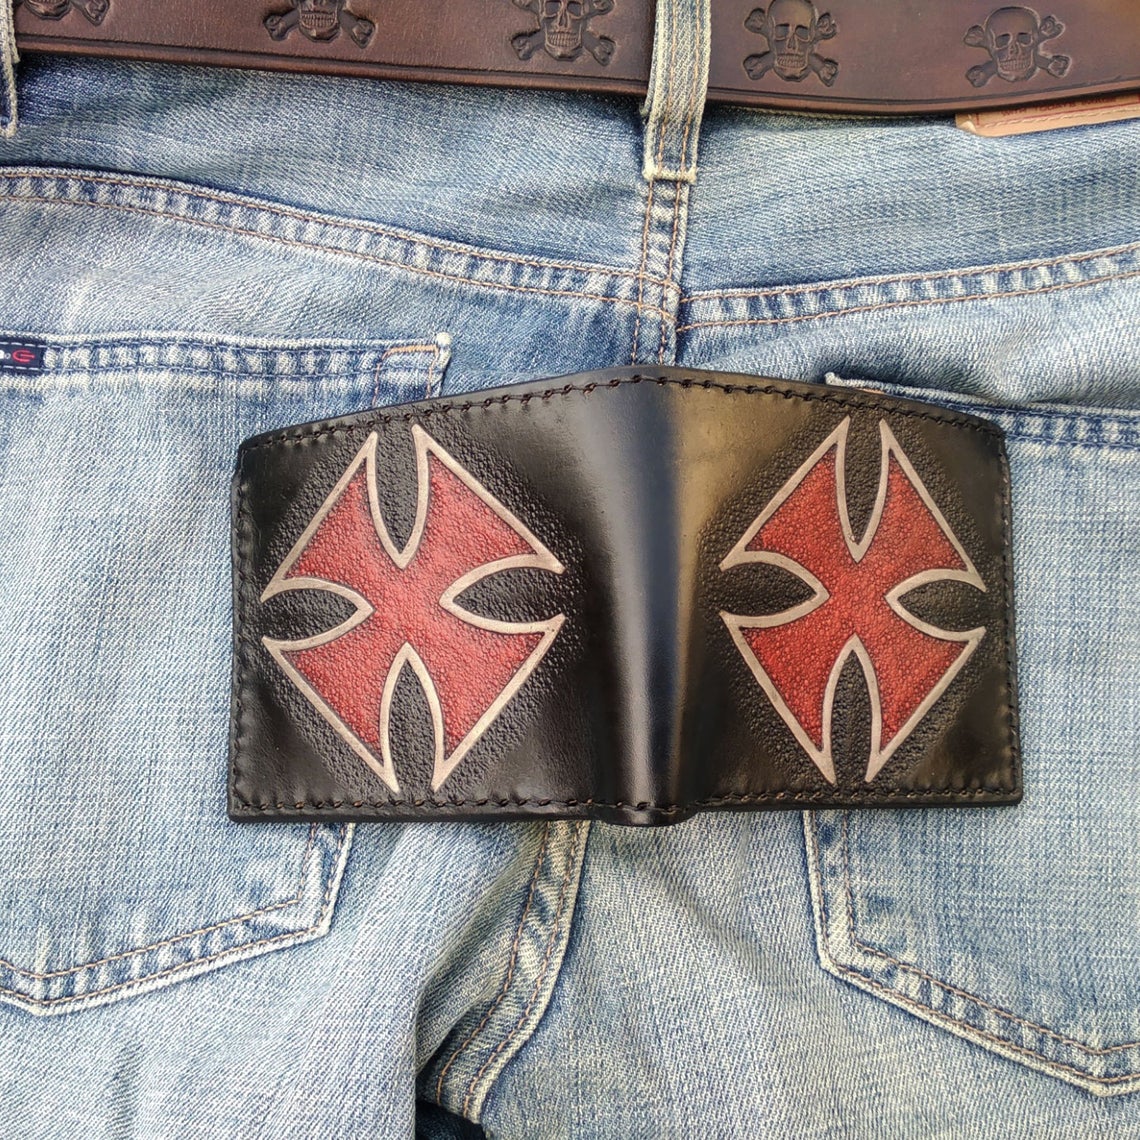 Handcrafted bifold wallet with iron cross